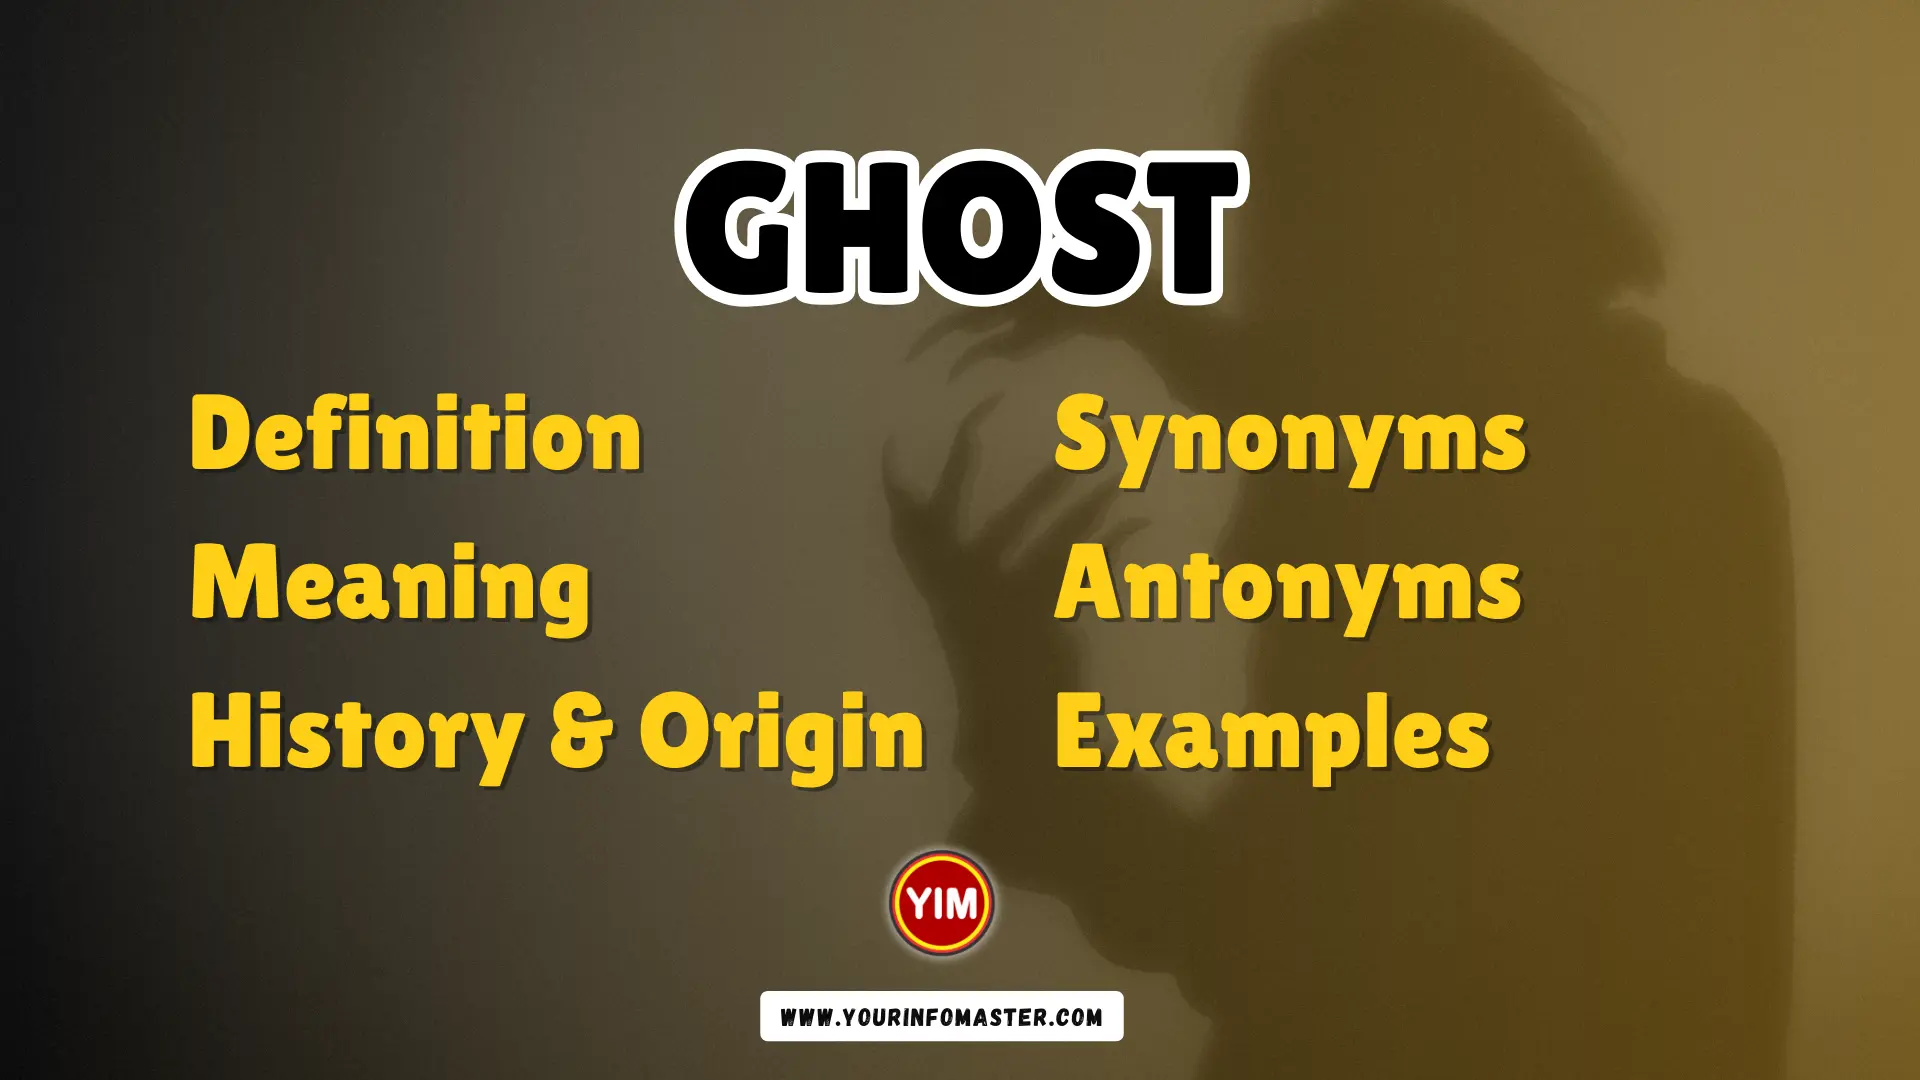 Ghost Synonyms, Antonyms, Example Sentences